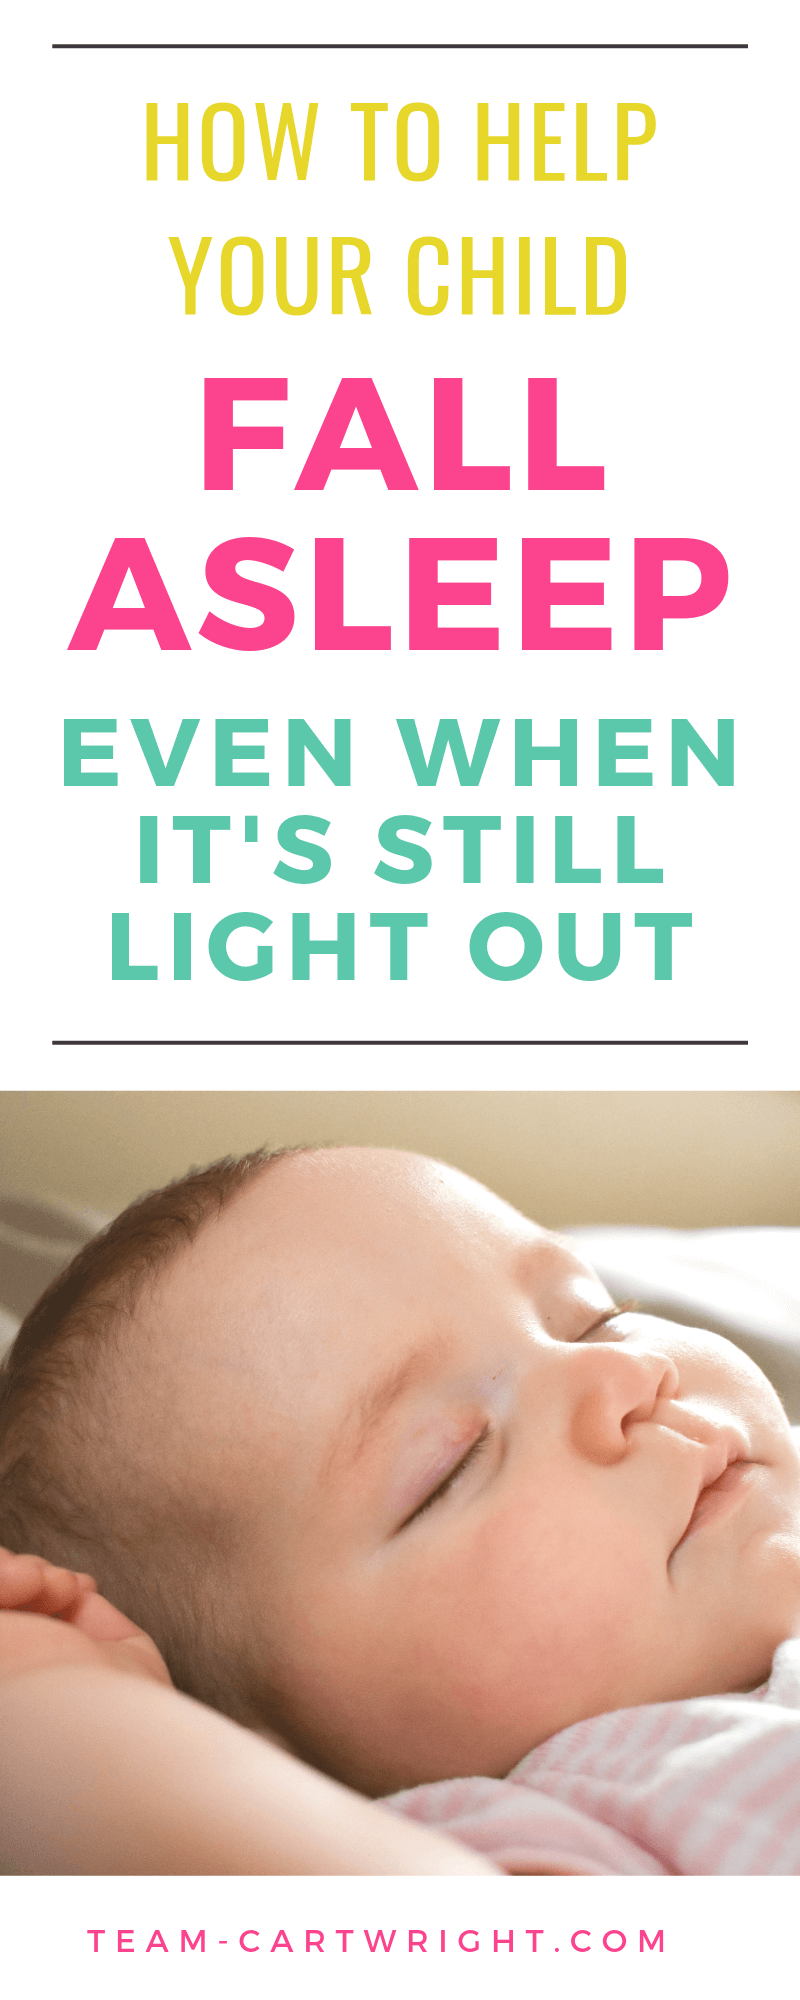 picture of a baby sleeping with text overlay: How to help your child fall asleep even when it's still light out